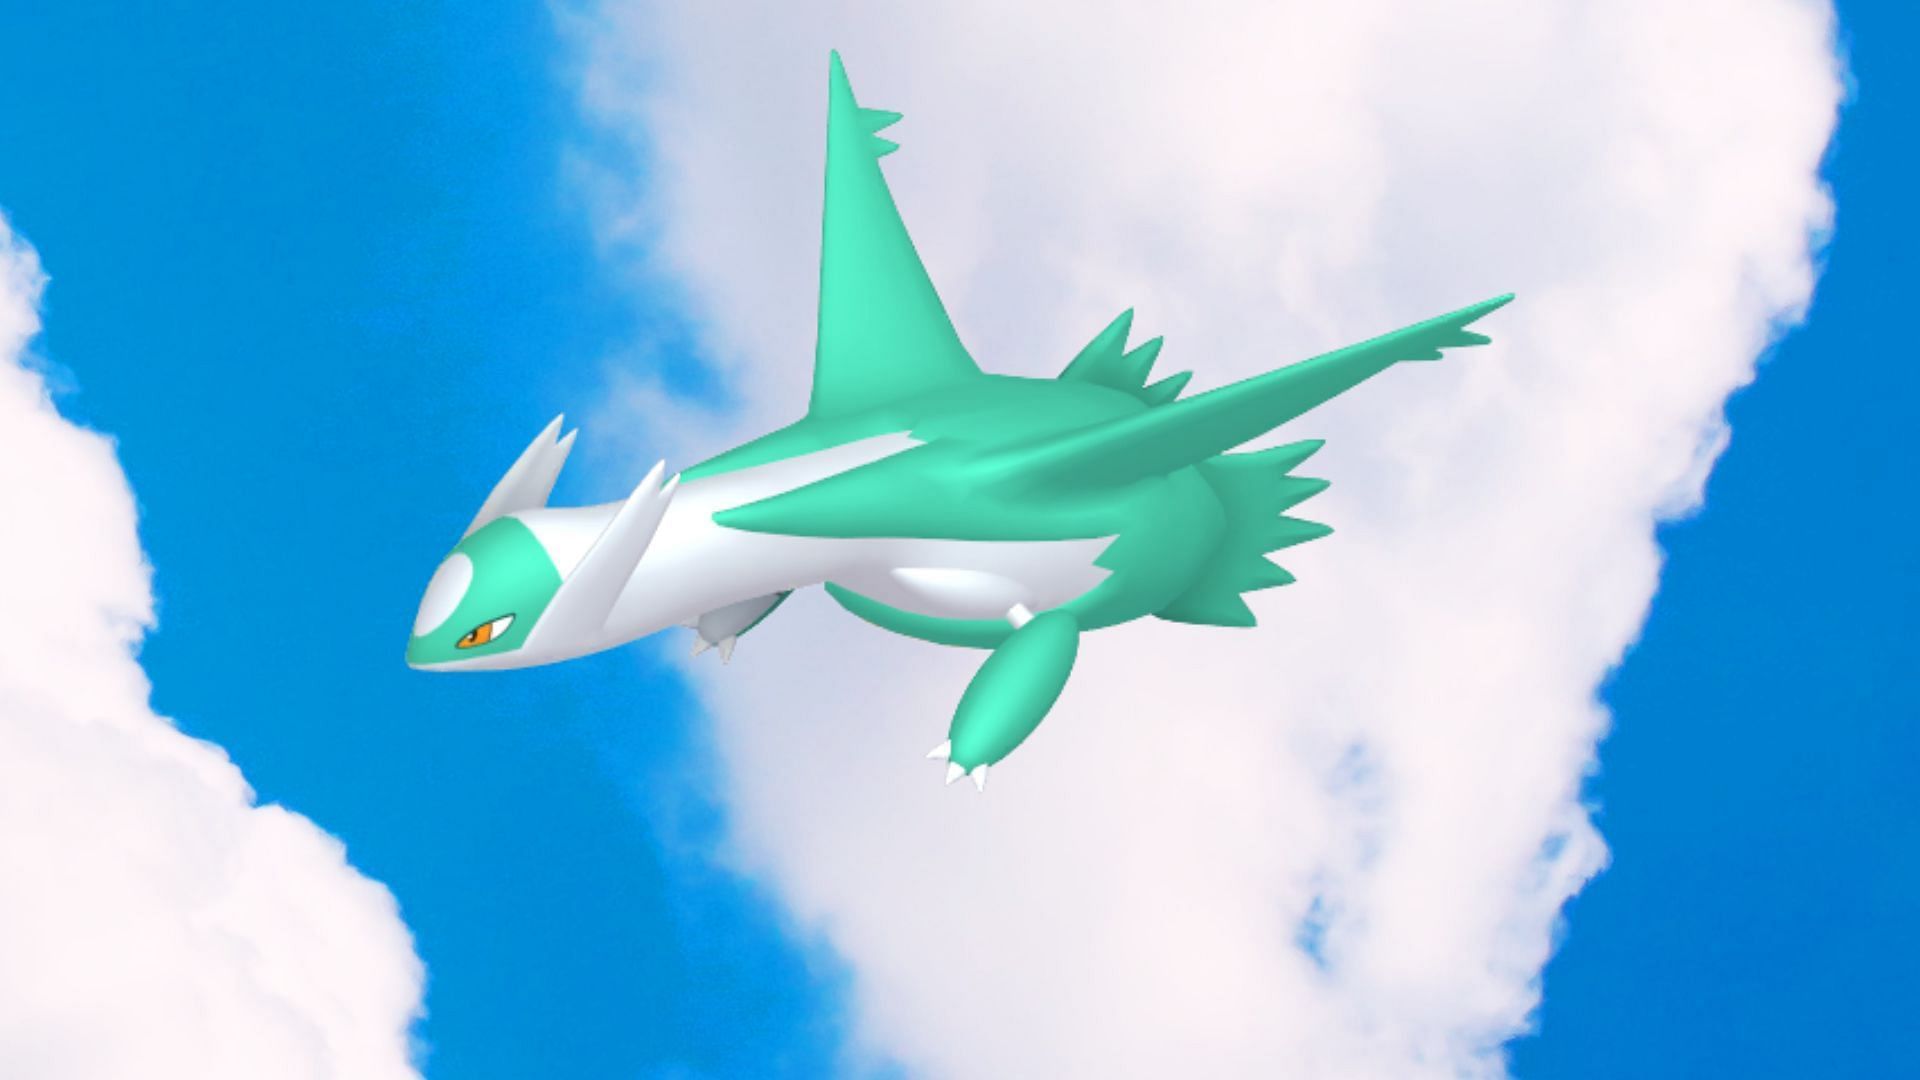 How to get a Shiny Latios in Pokemon GO